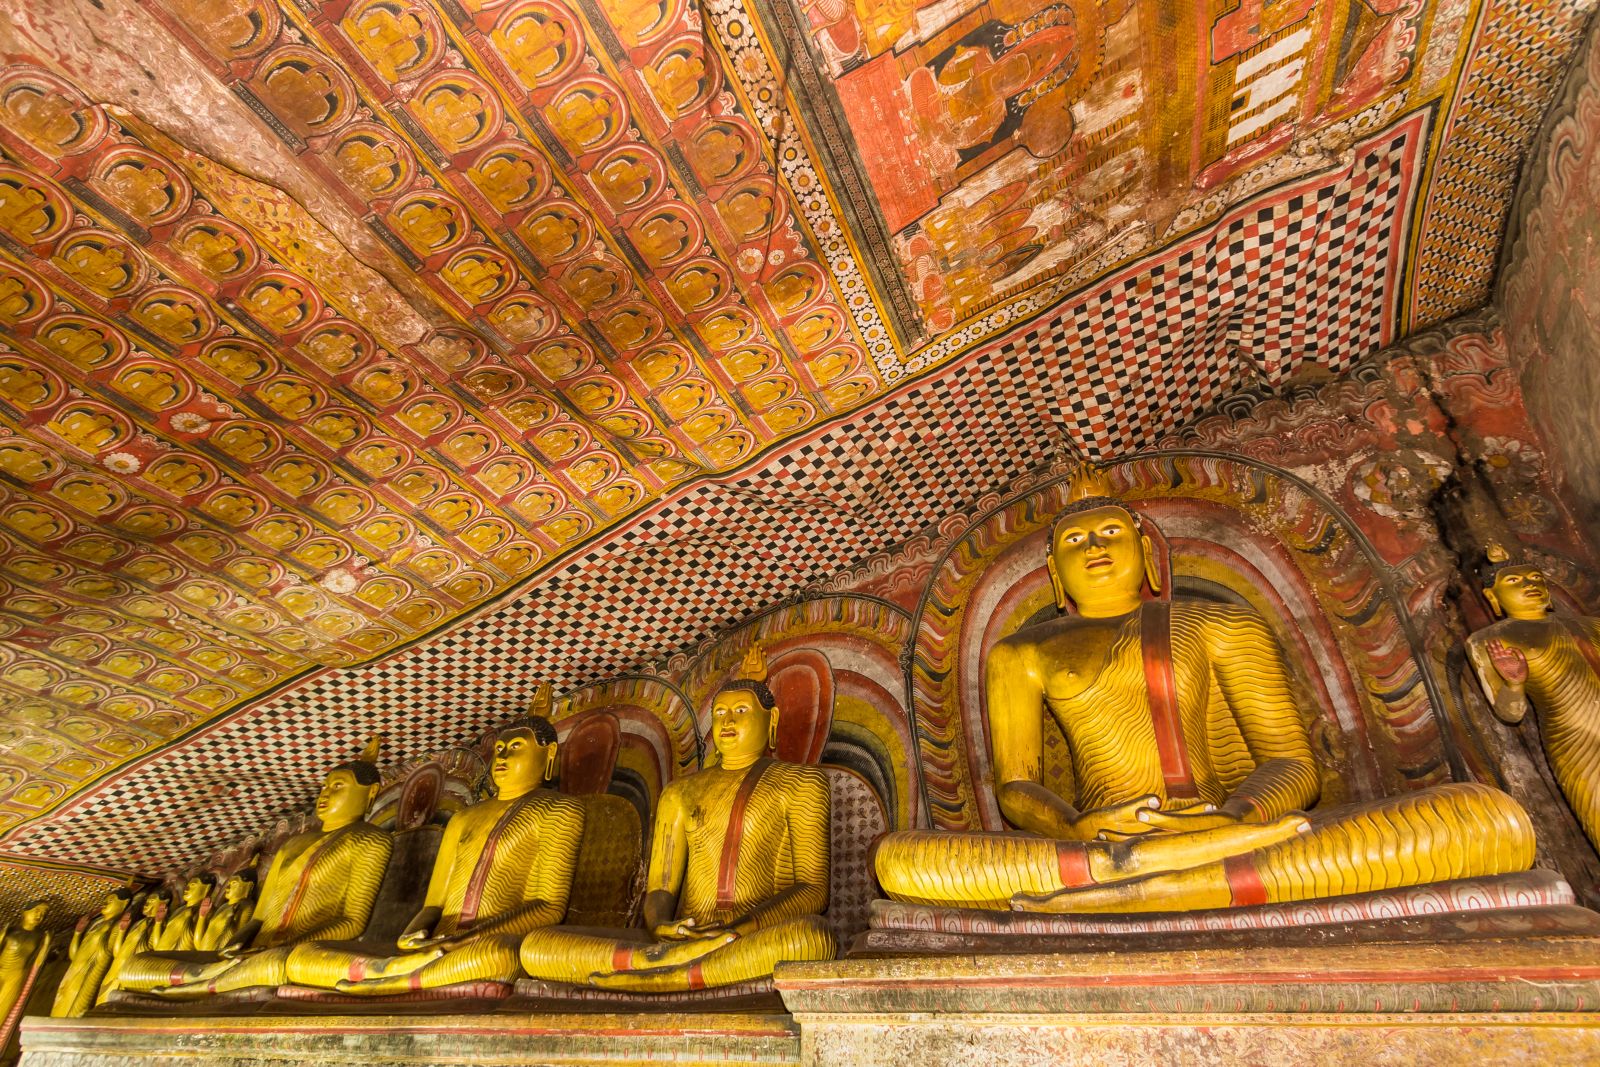 Interior of Sri Lanka's Dambulla Caves with buddhas and ornate paintings